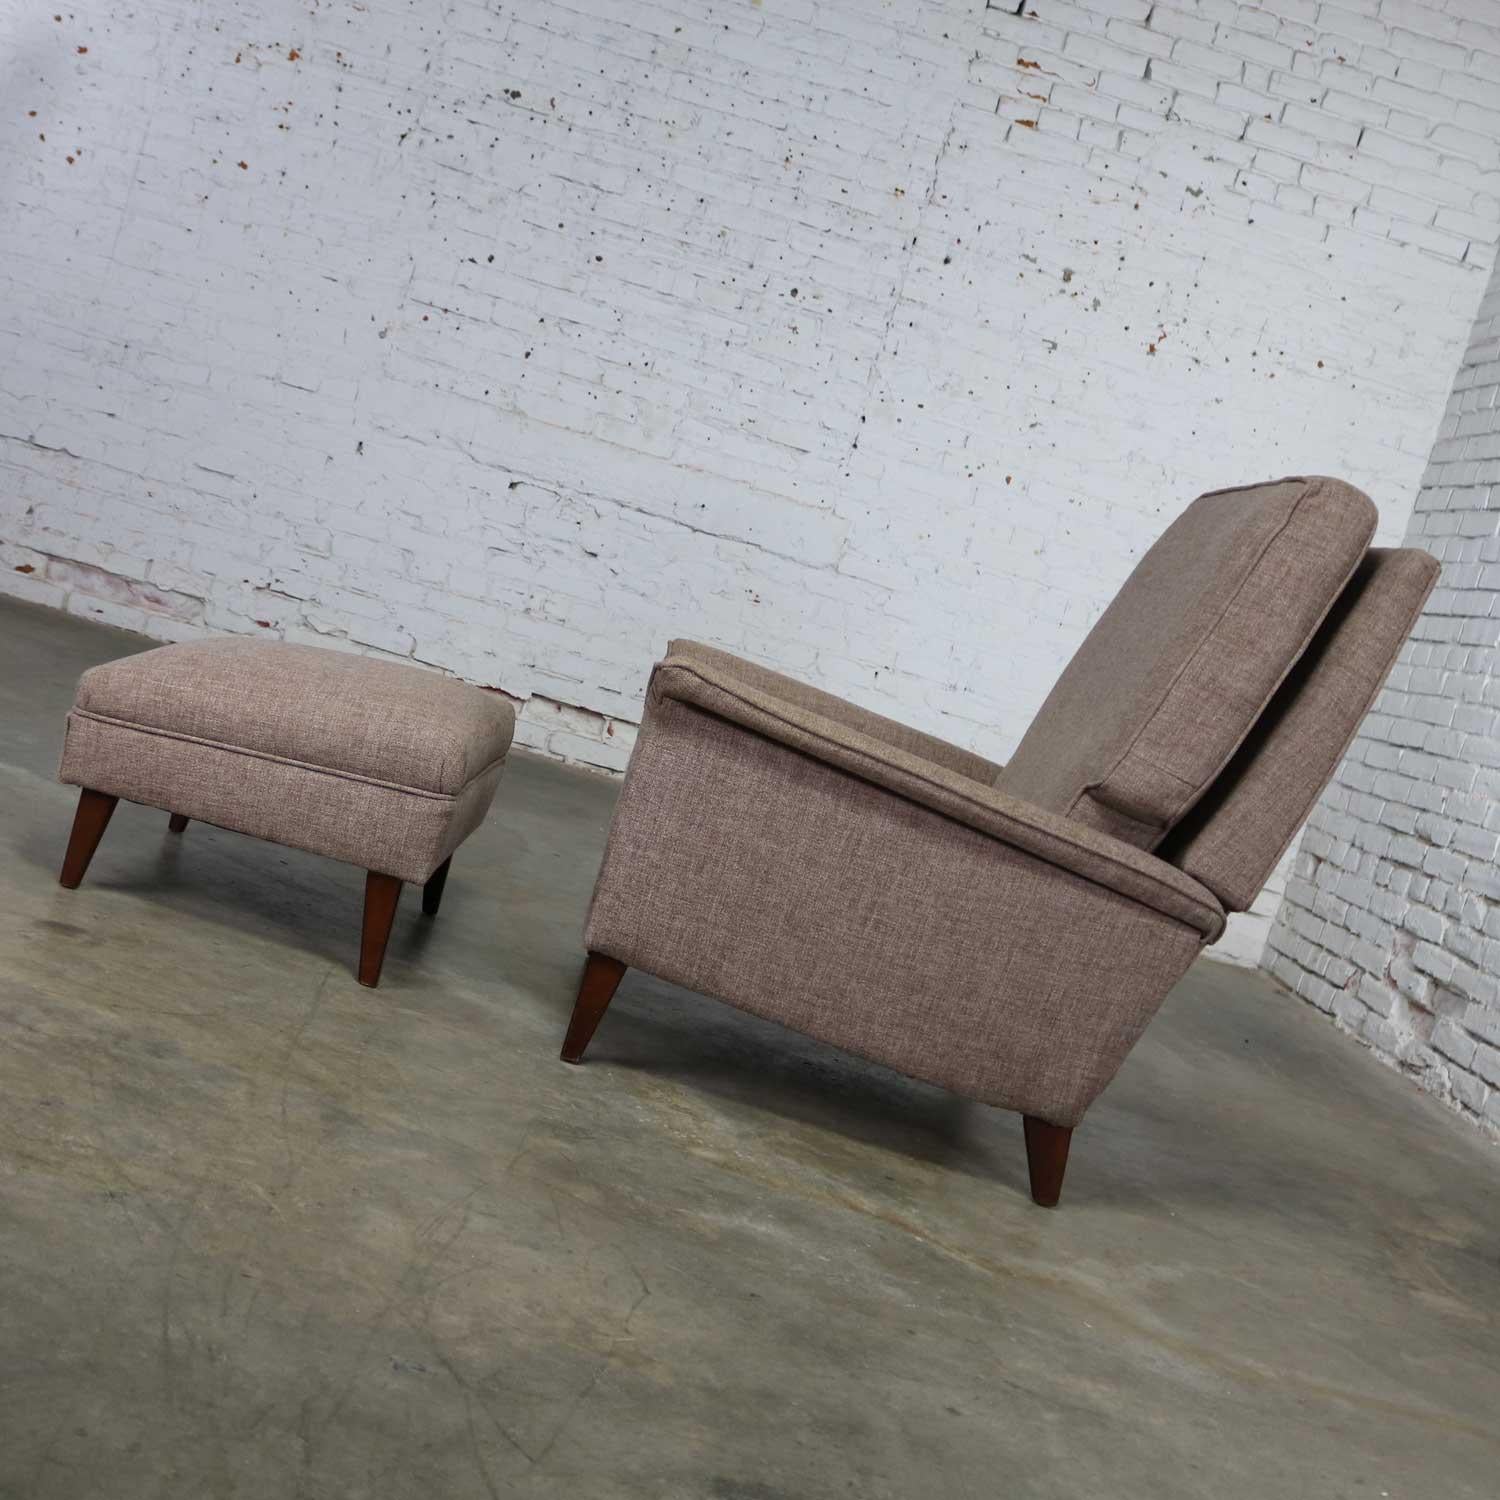 Handsome Mid-Century Modern reclining lounge chair and ottoman done in the style of Edward Wormley for Dunbar Fine Furniture. Both pieces are in wonderful overall vintage condition. The wood legs have standard nicks and dings you would expect with